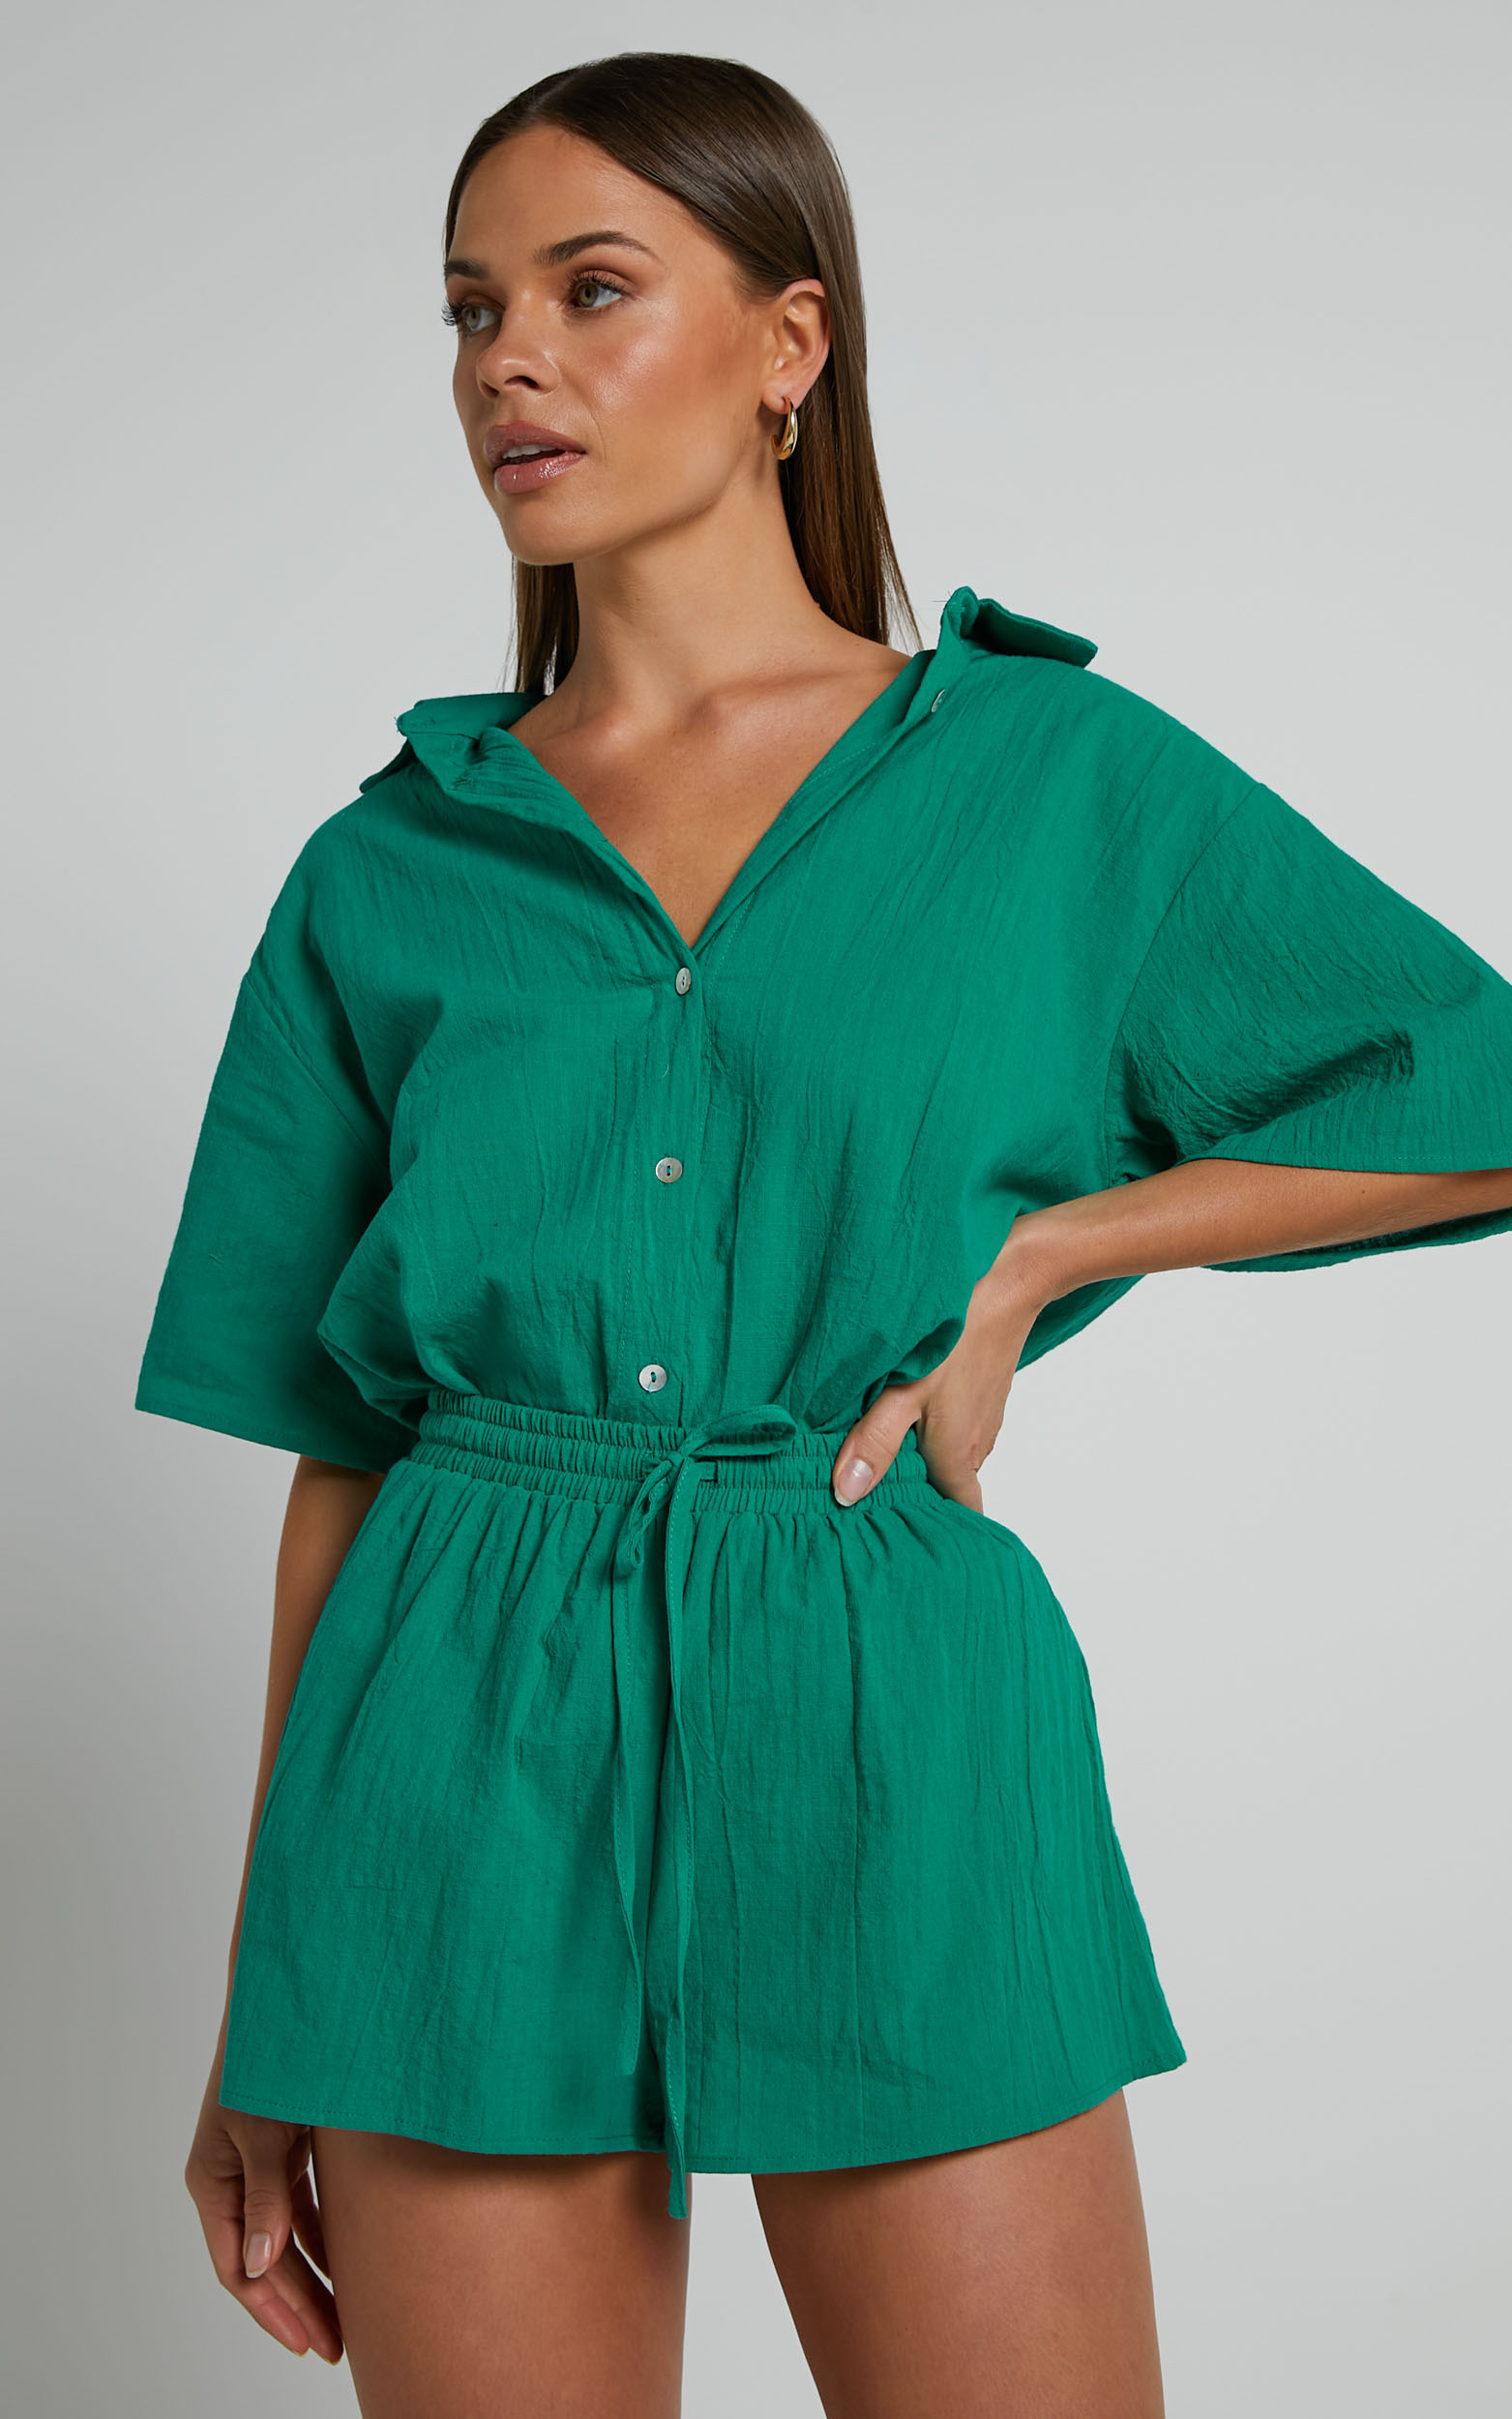 Vina del Mar Button Up Shirt and Shorts Two Piece Set in Green - 04, GRN1, hi-res image number null